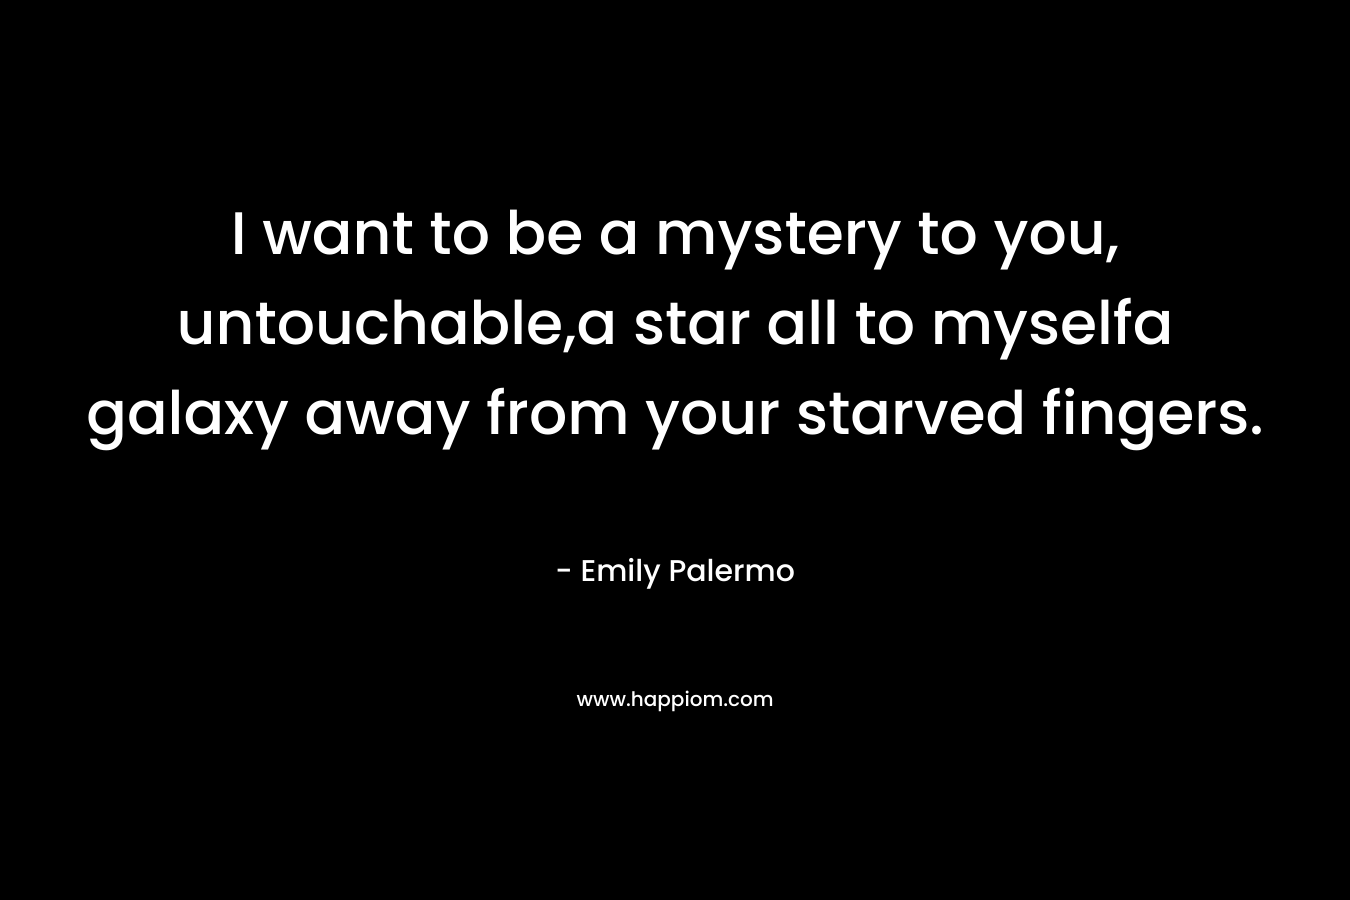 I want to be a mystery to you, untouchable,a star all to myselfa galaxy away from your starved fingers. – Emily Palermo